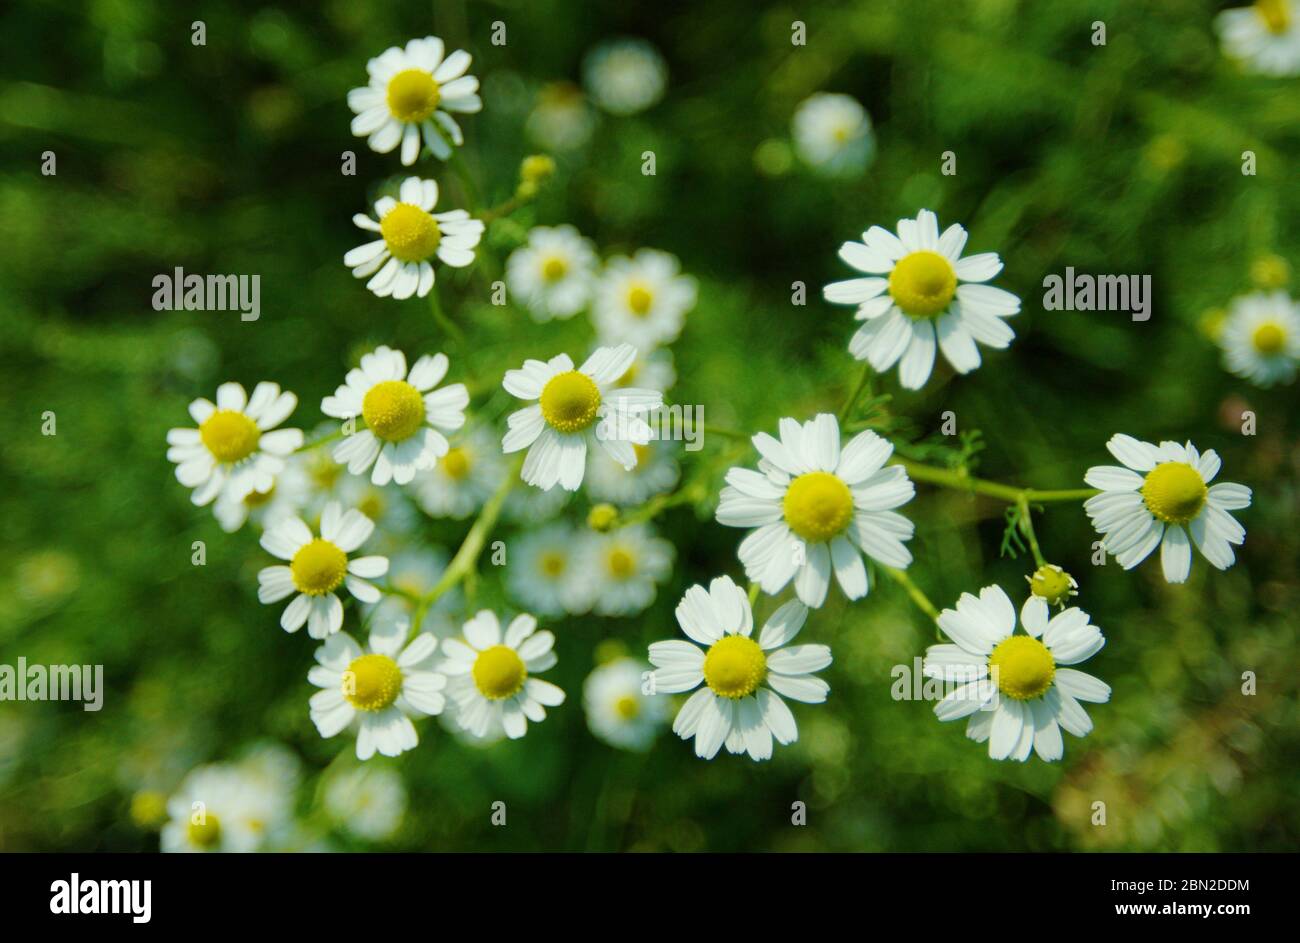 Chamomile or camomile  see spelling differences is the common name for several daisy-like plants of the family Asteraceae. Two of the species are comm Stock Photo